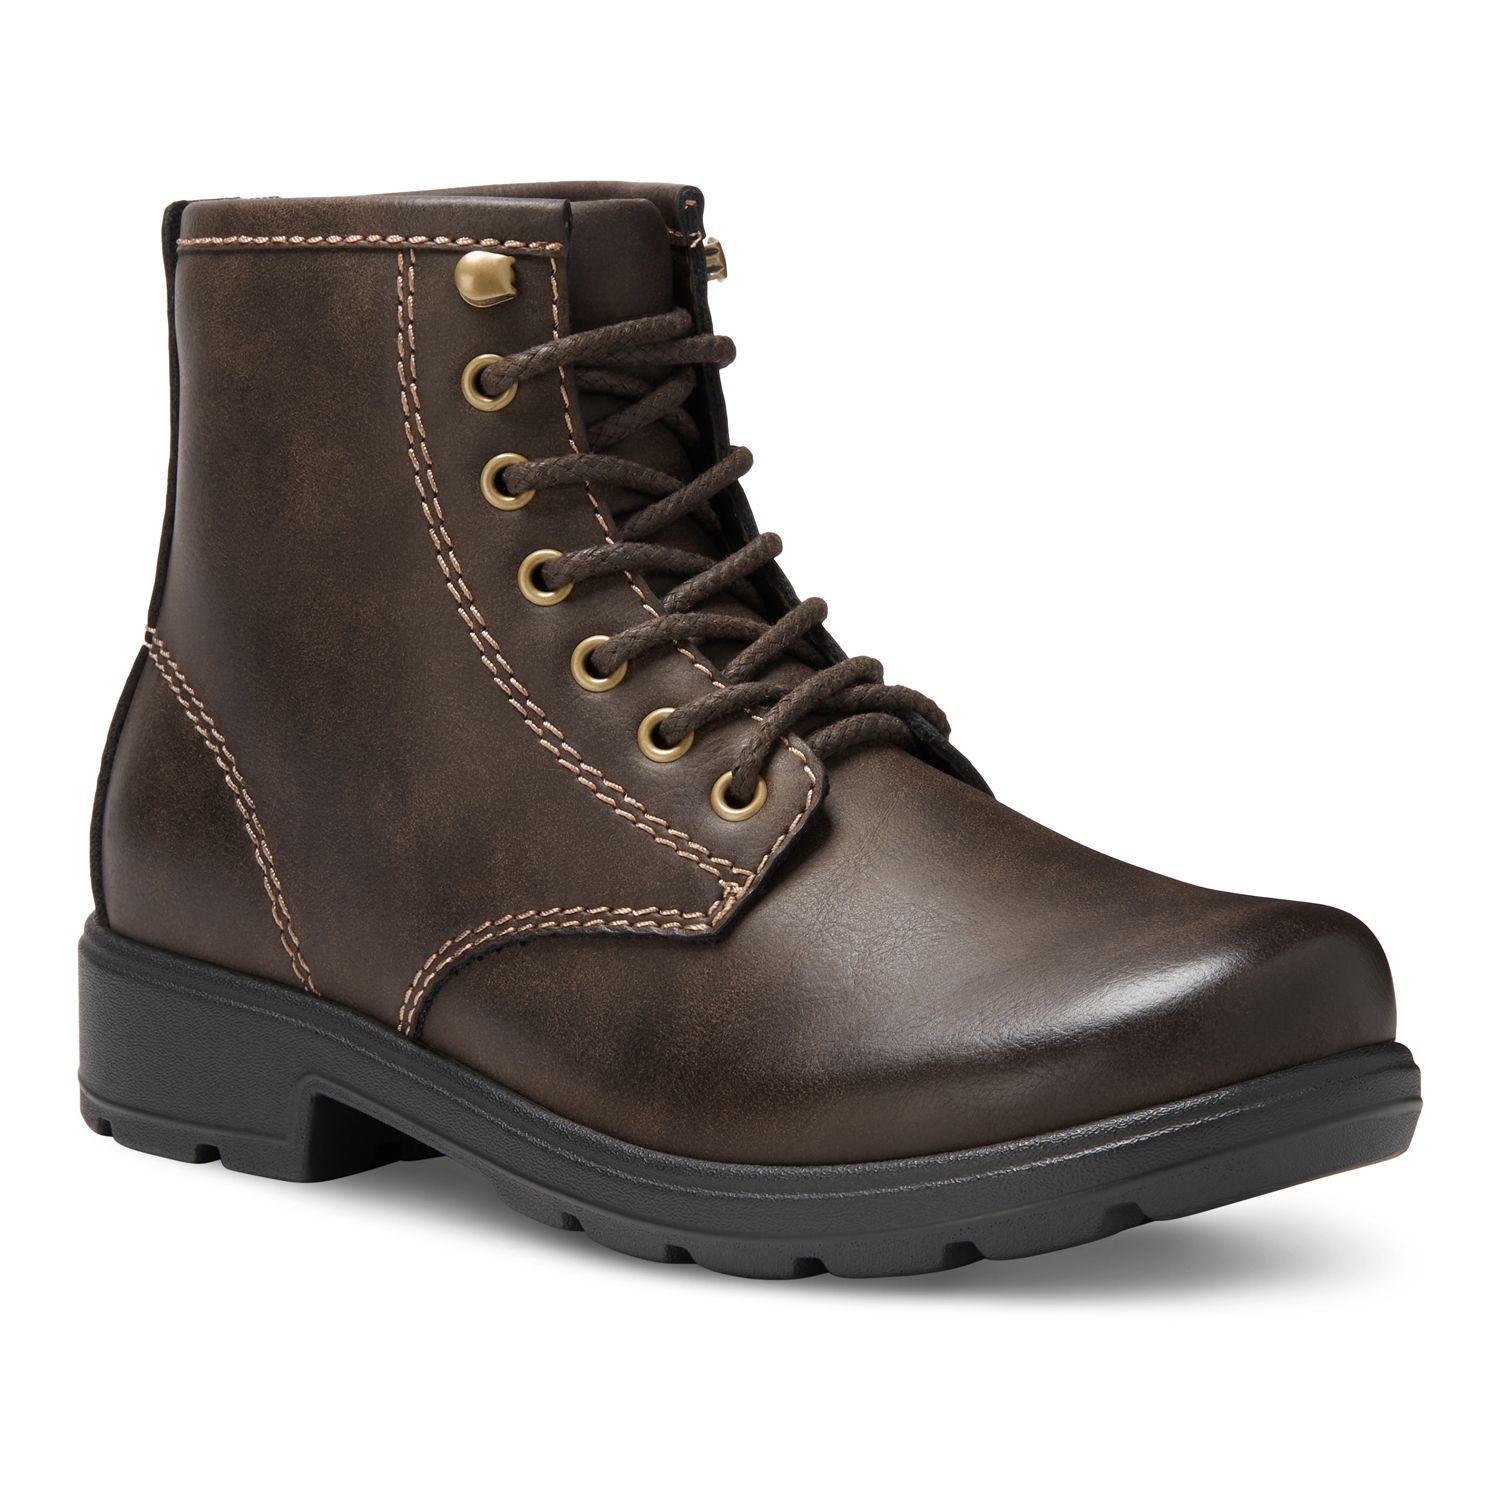 Image for Eastland Brandy Women's Ankle Boots at Kohl's.